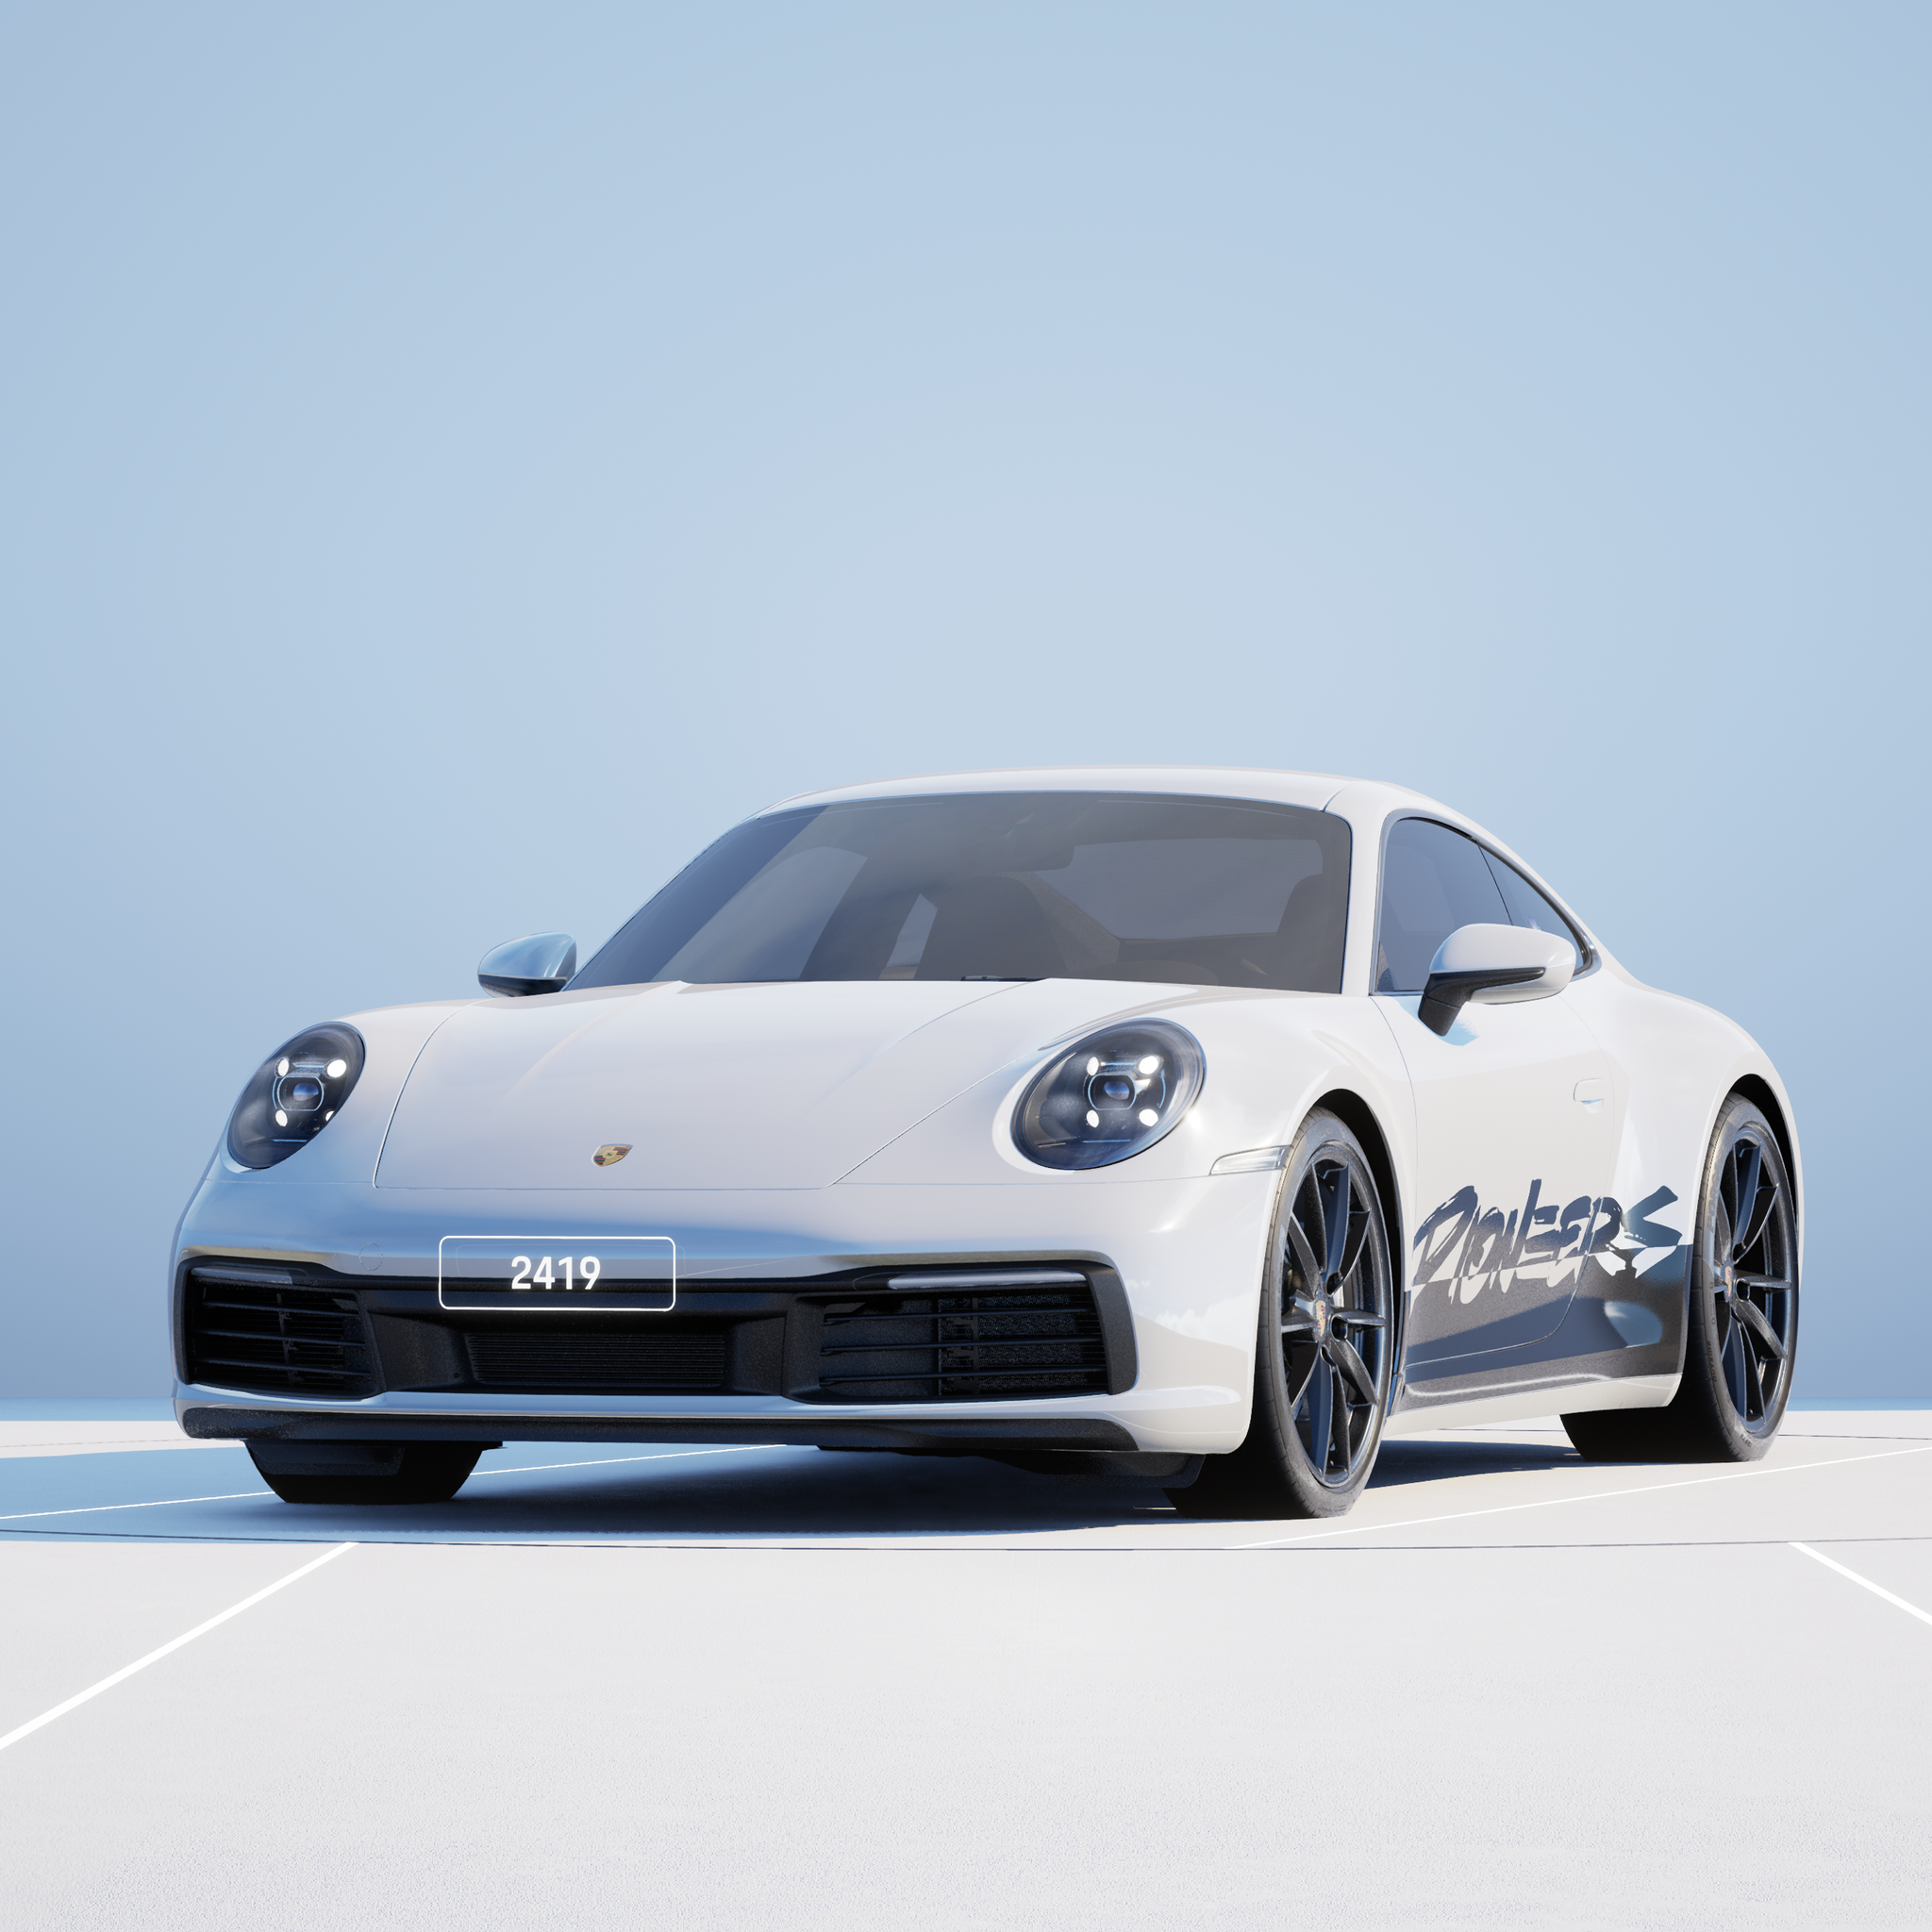 The PORSCHΞ 911 2419 image in phase